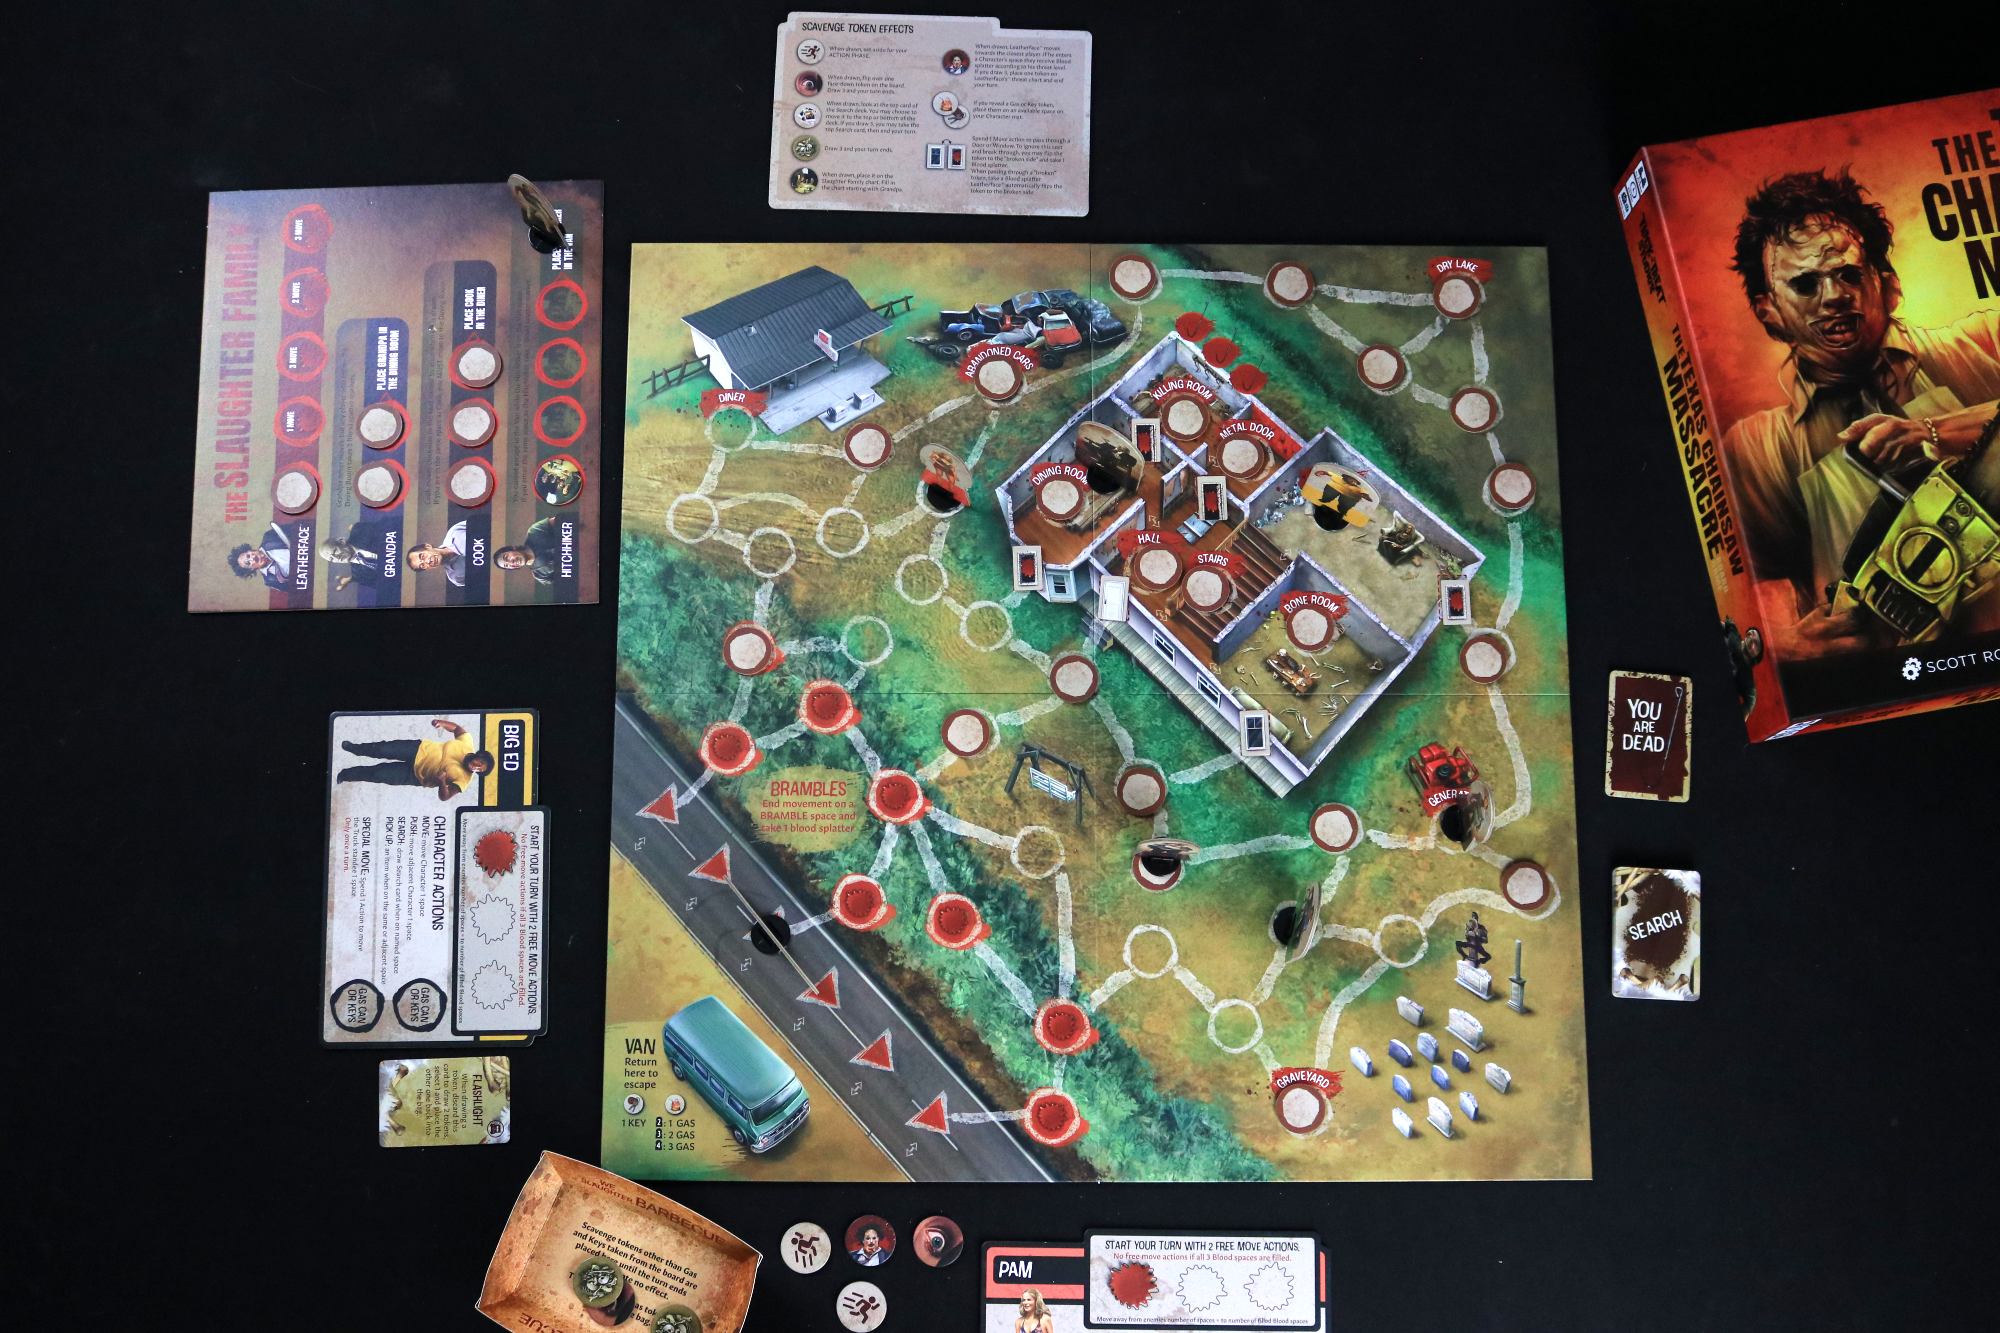 The Texas Chainsaw Massacre Board Game - board overview